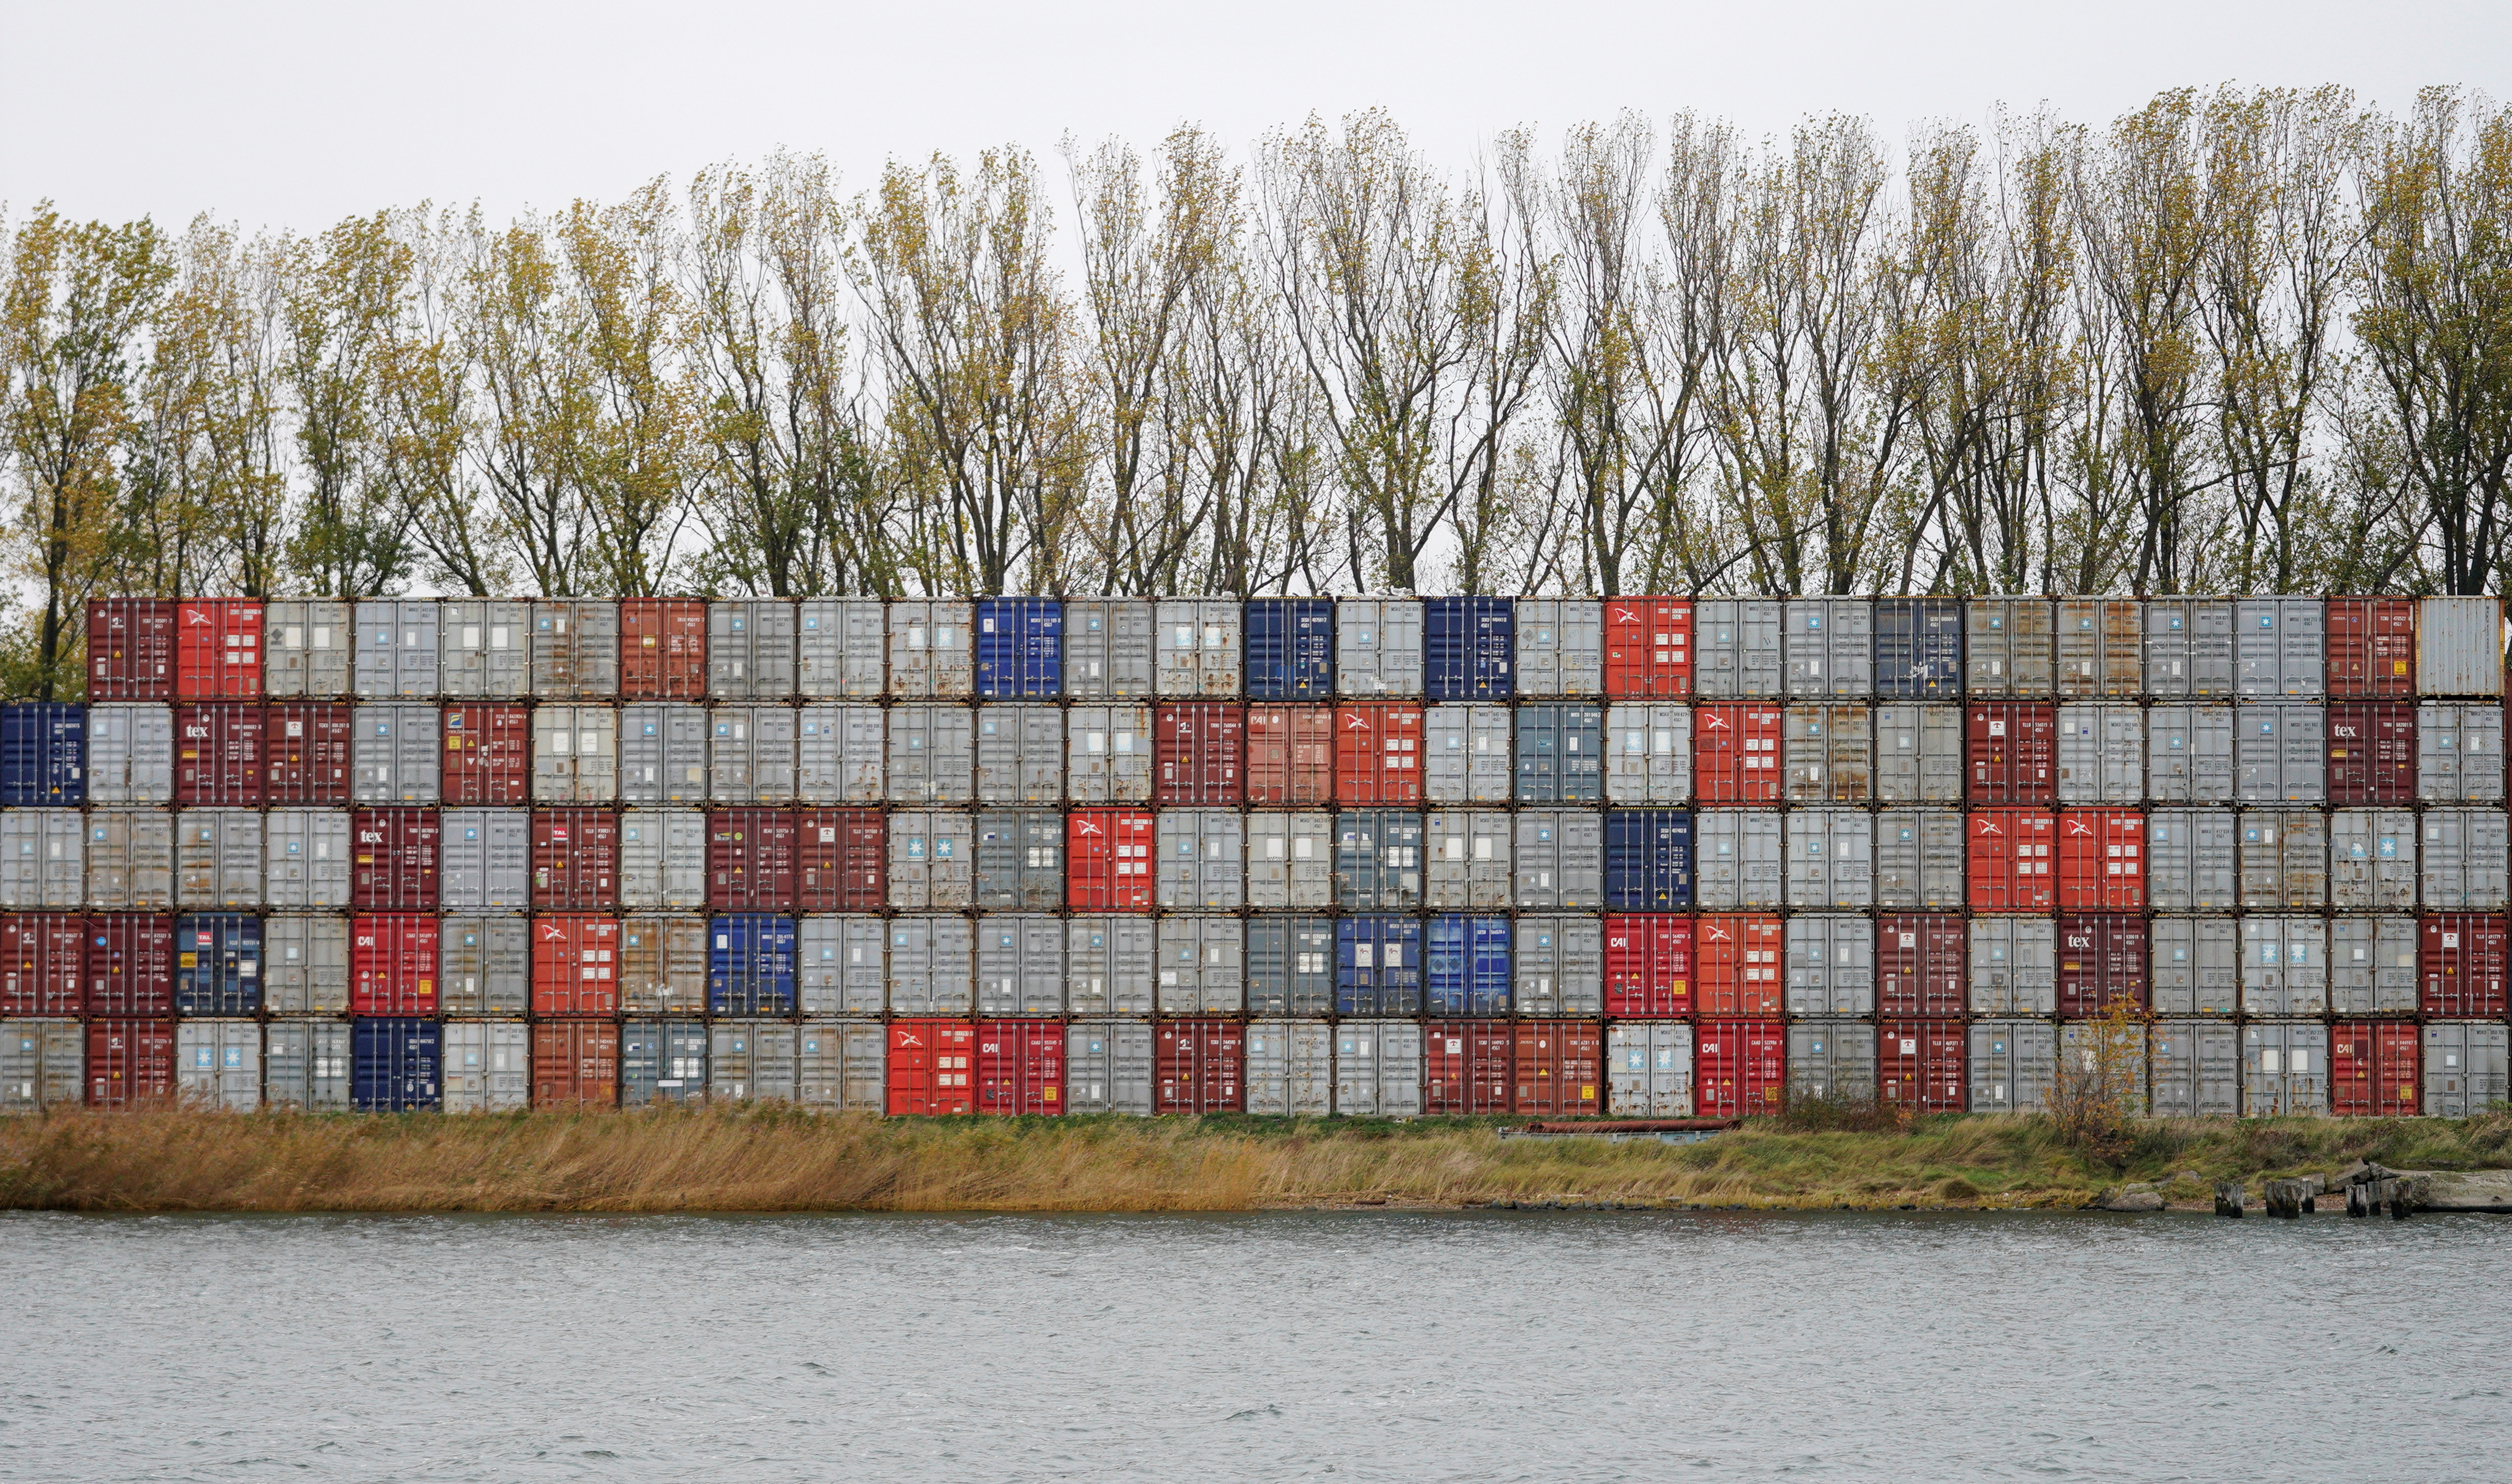 A view shows shipping containers at a port in Baltiysk